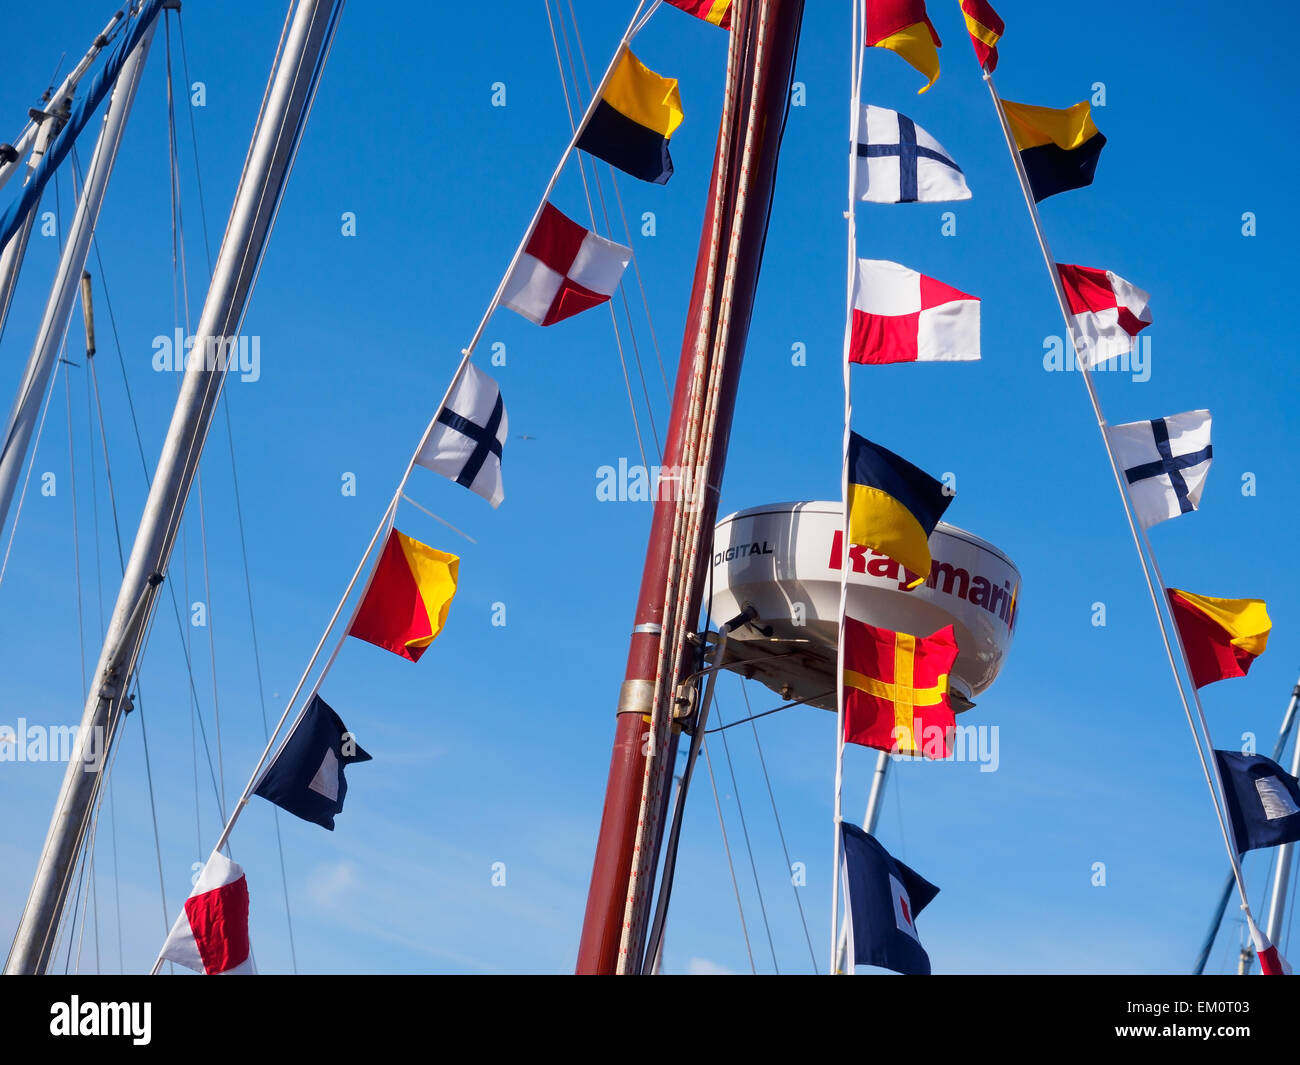 Colourful flags and pennants on a boat. Stock Photo